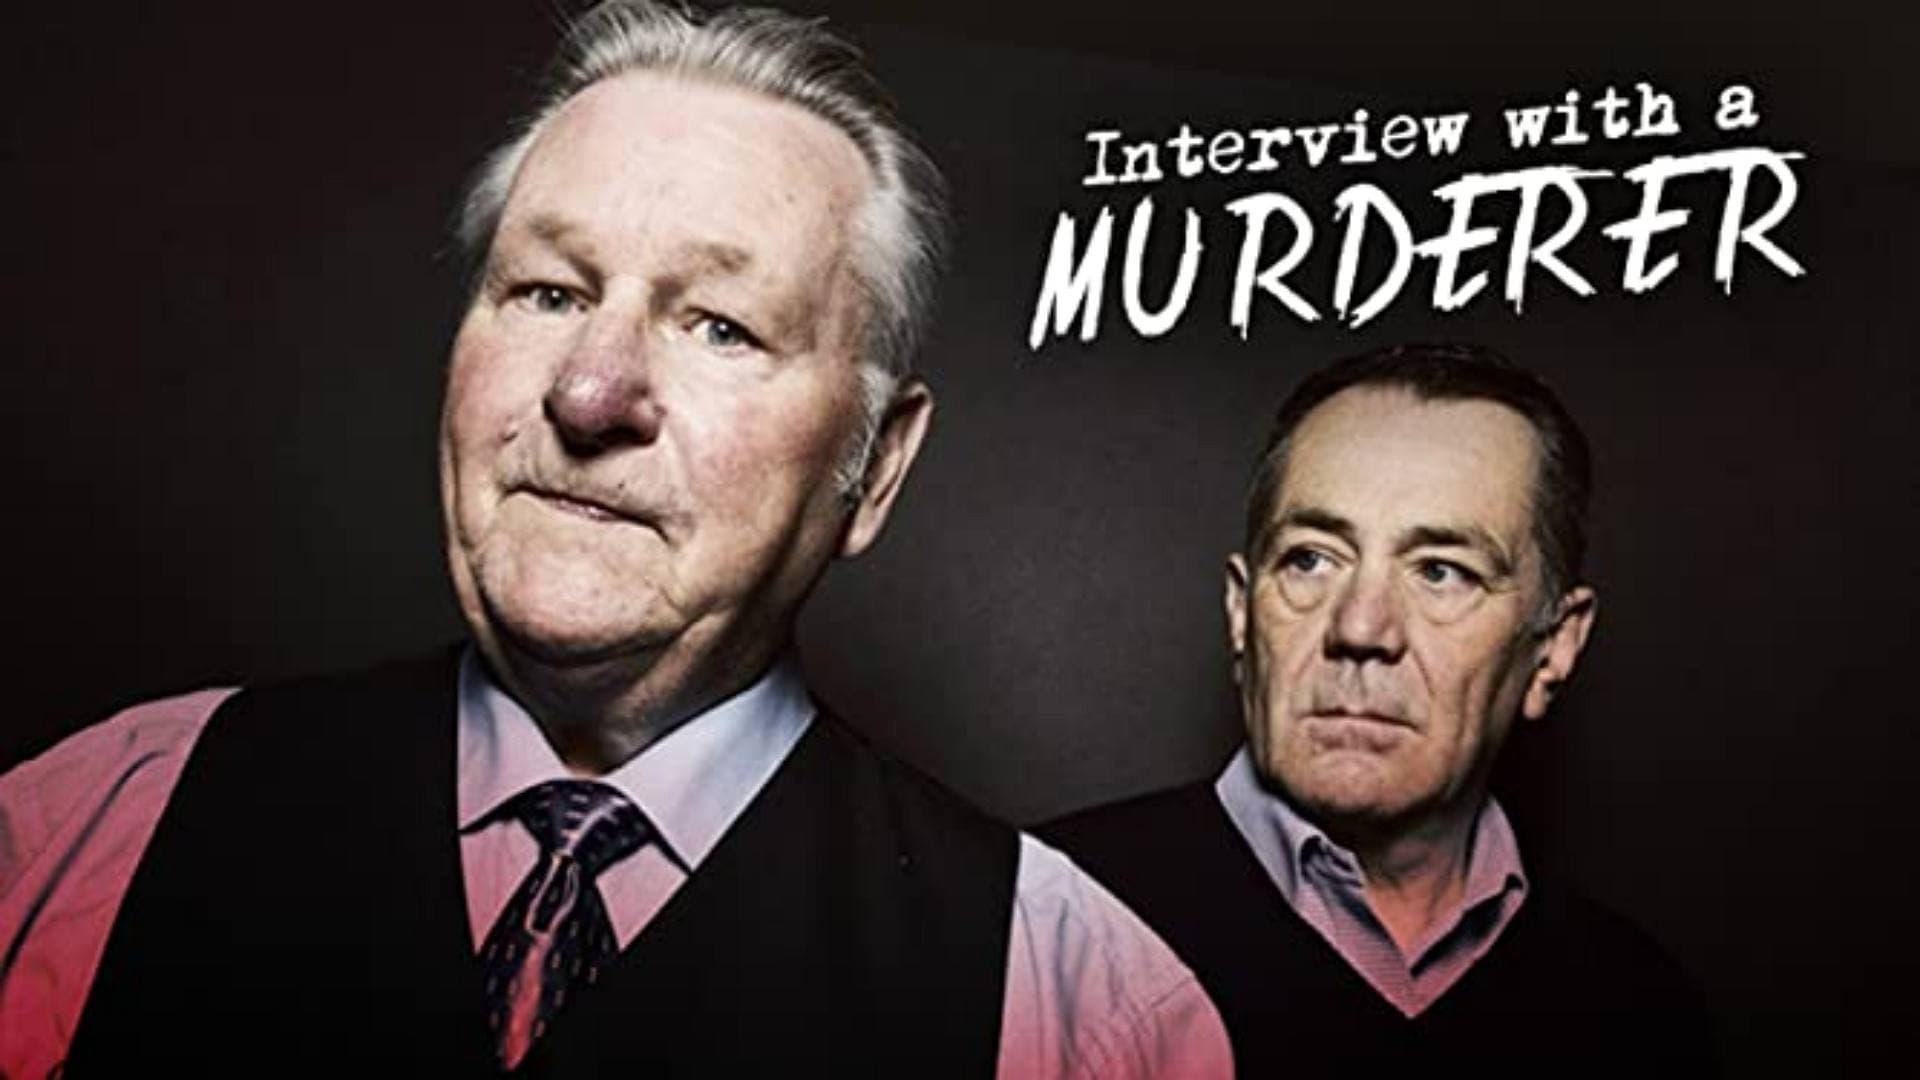 Interview With A Murderer backdrop